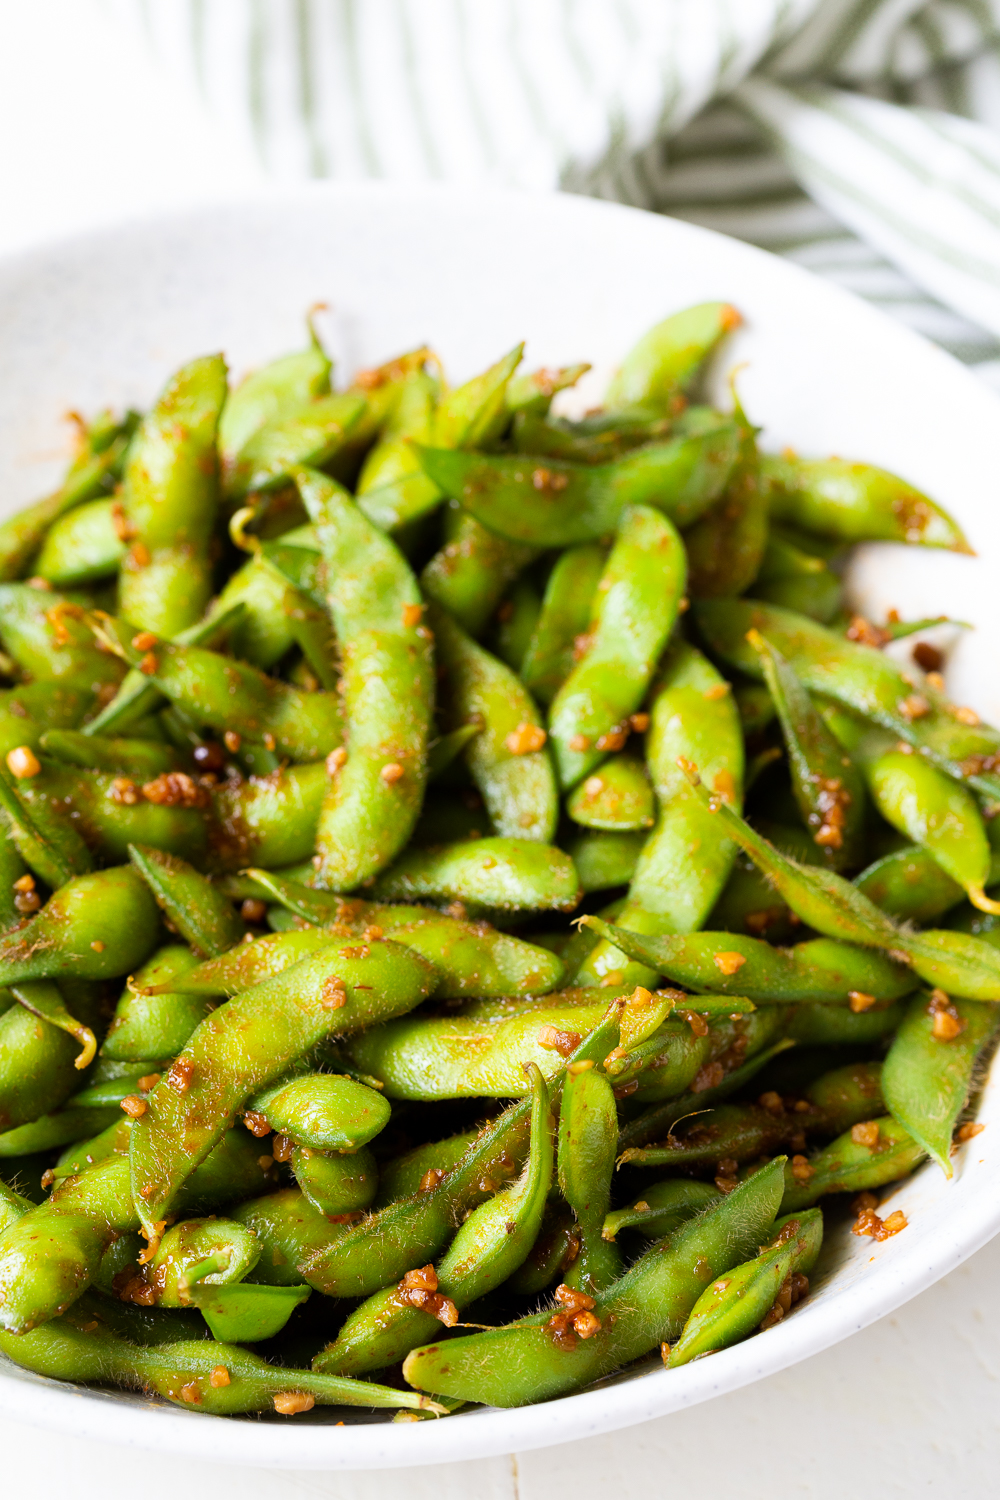 An Easy Recipe for Spicy Edamame (Soy Beans)